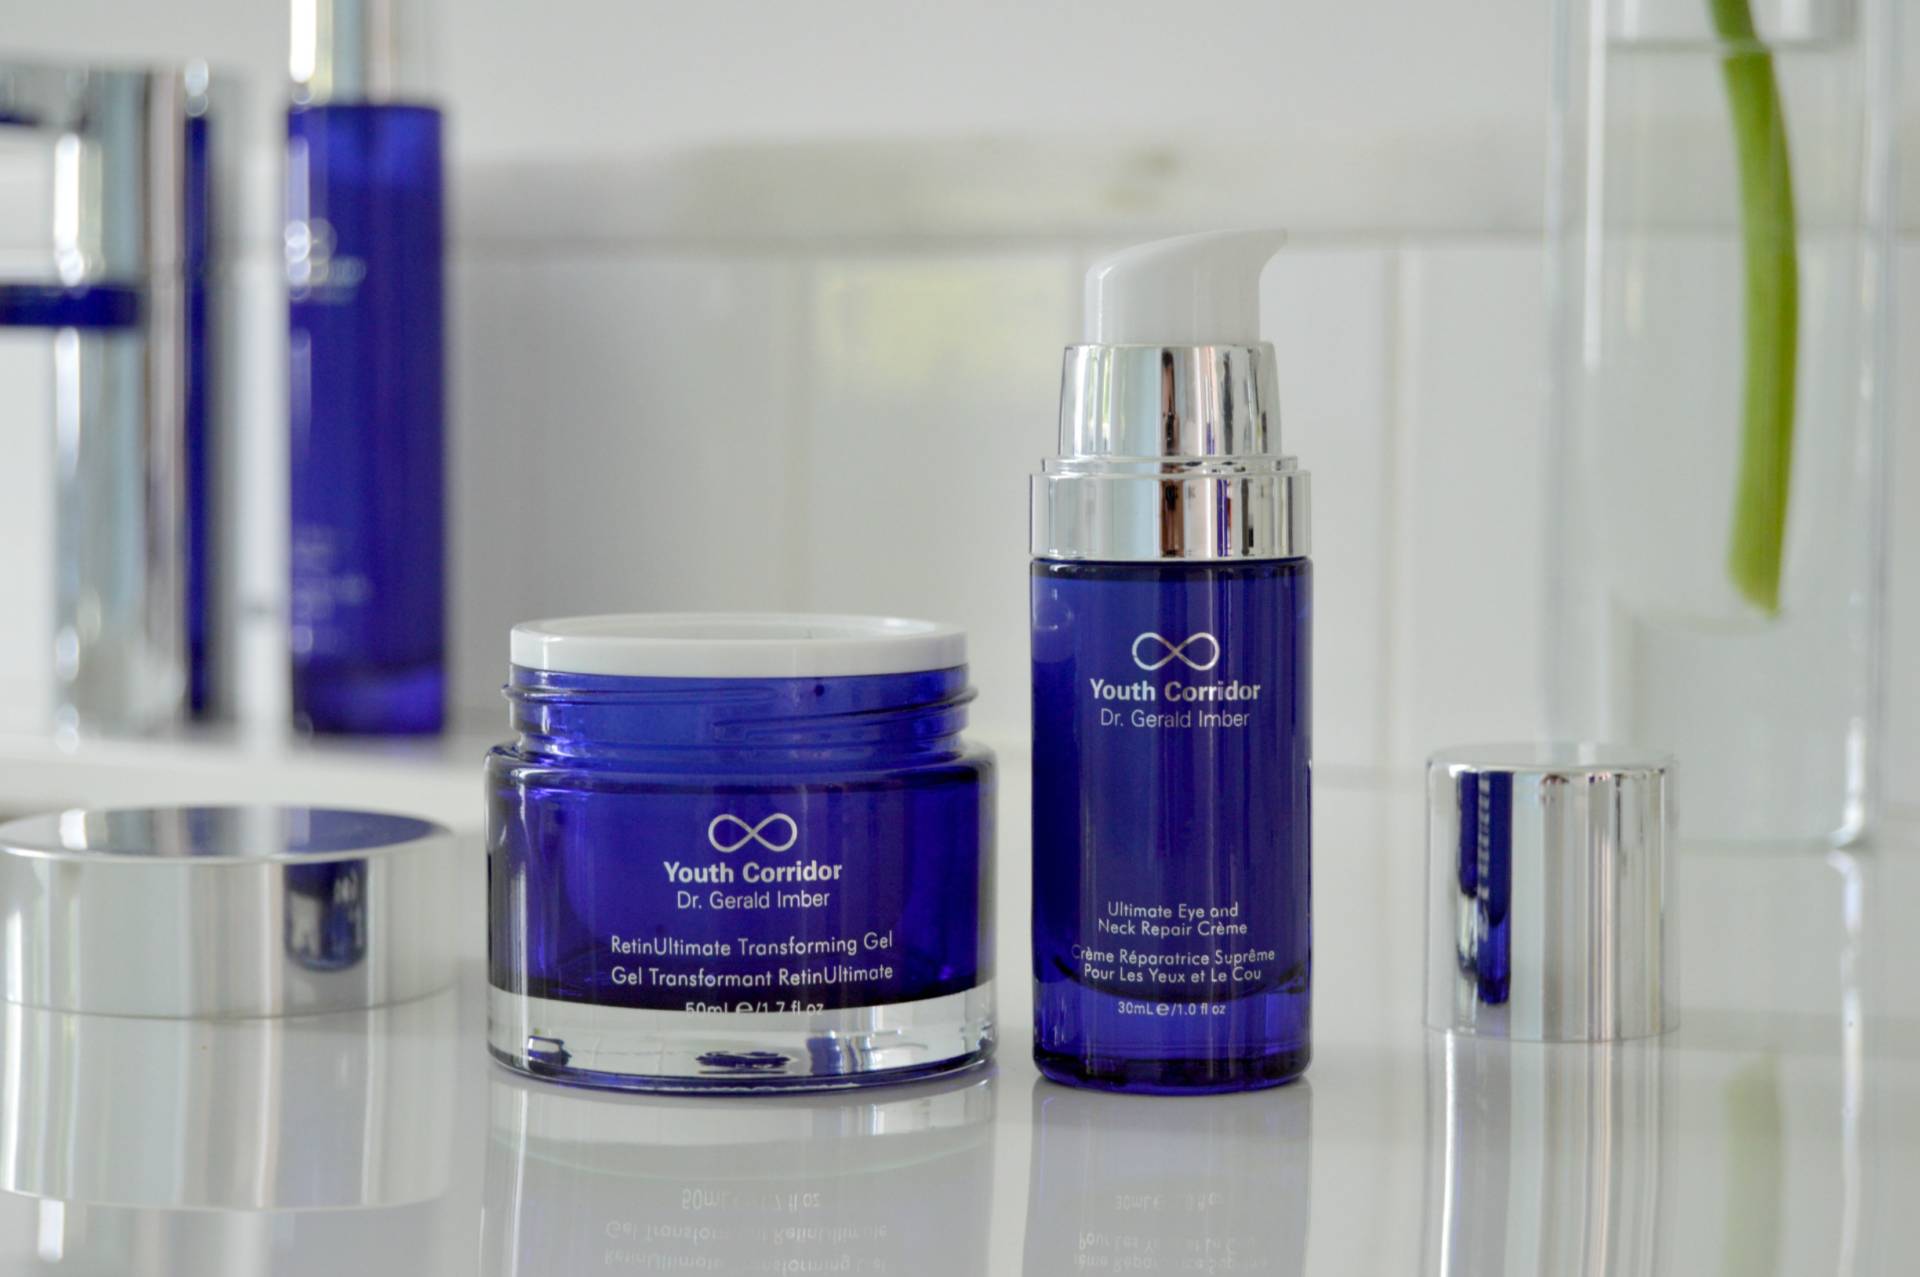 youth-corridor-by-dr-imber-skincare-review-net-a-porter